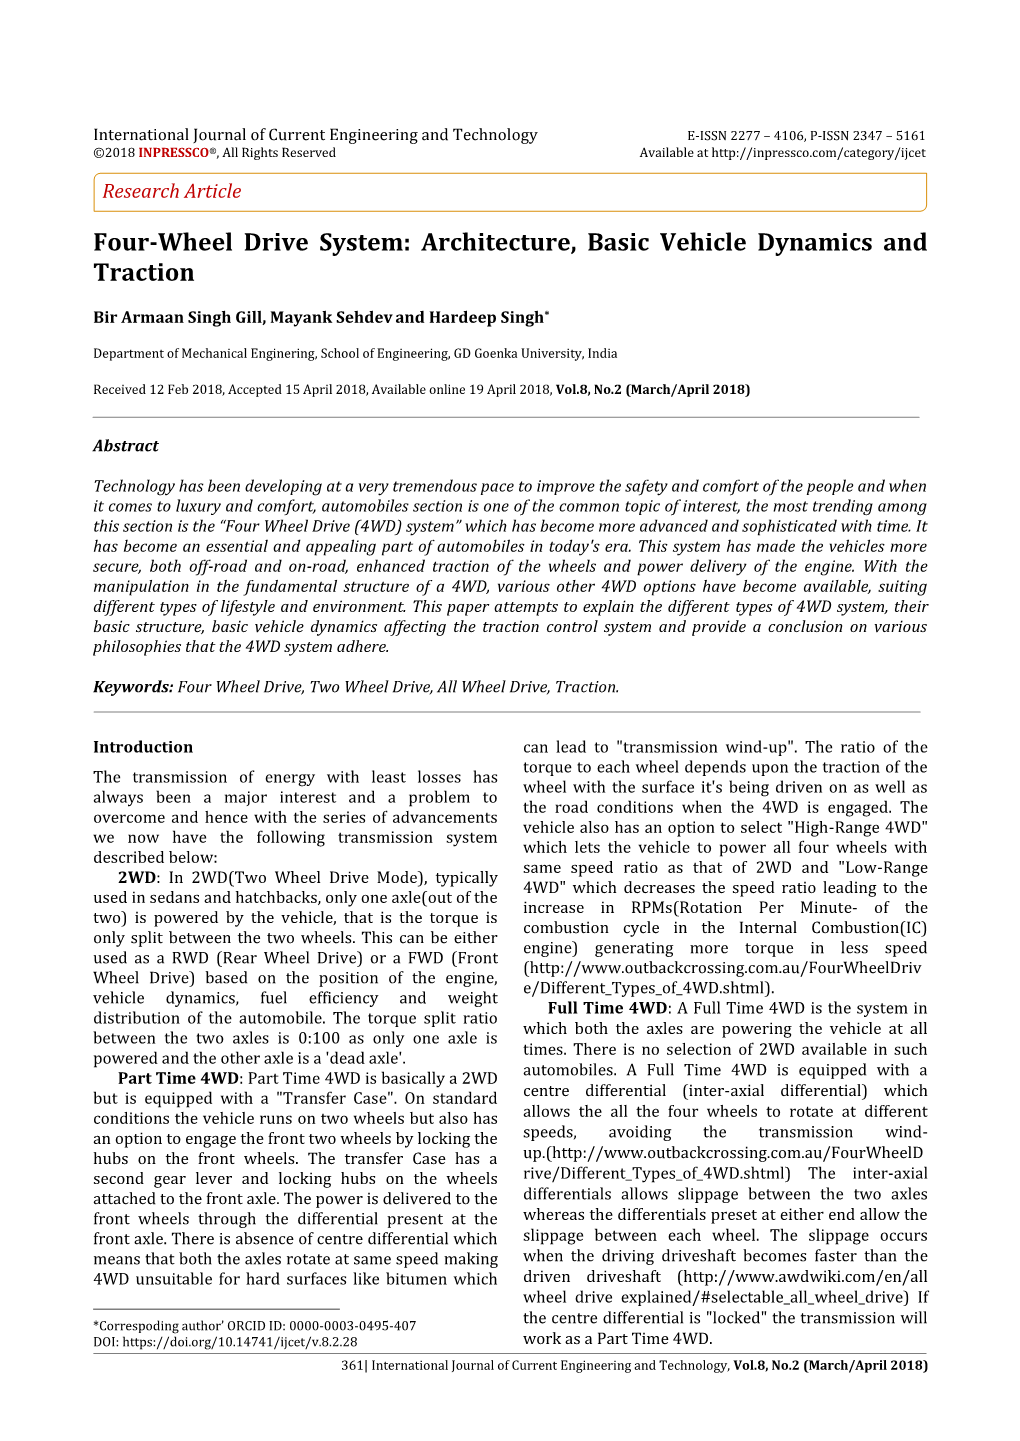 Four-Wheel Drive System: Architecture, Basic Vehicle Dynamics and Traction